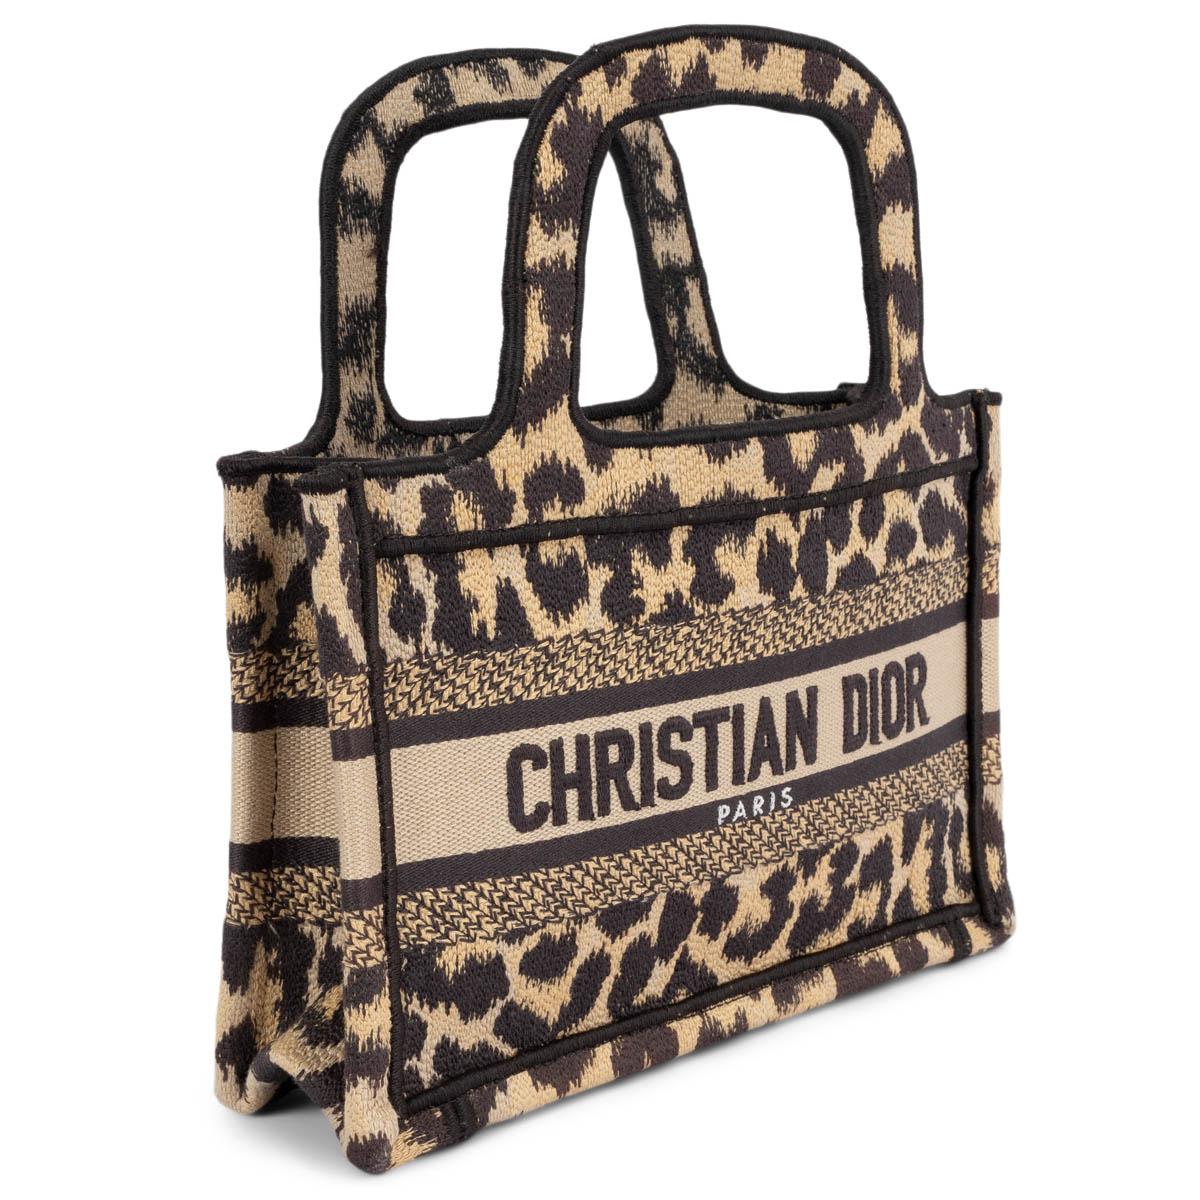 100% authentic Christian Dior Mini Book tote in beige and black leopard mizza embroidered canvas. Features logo embroidered on the front and features an opens top that leads to a matching fabric interior. Has been carried once and is in virtually